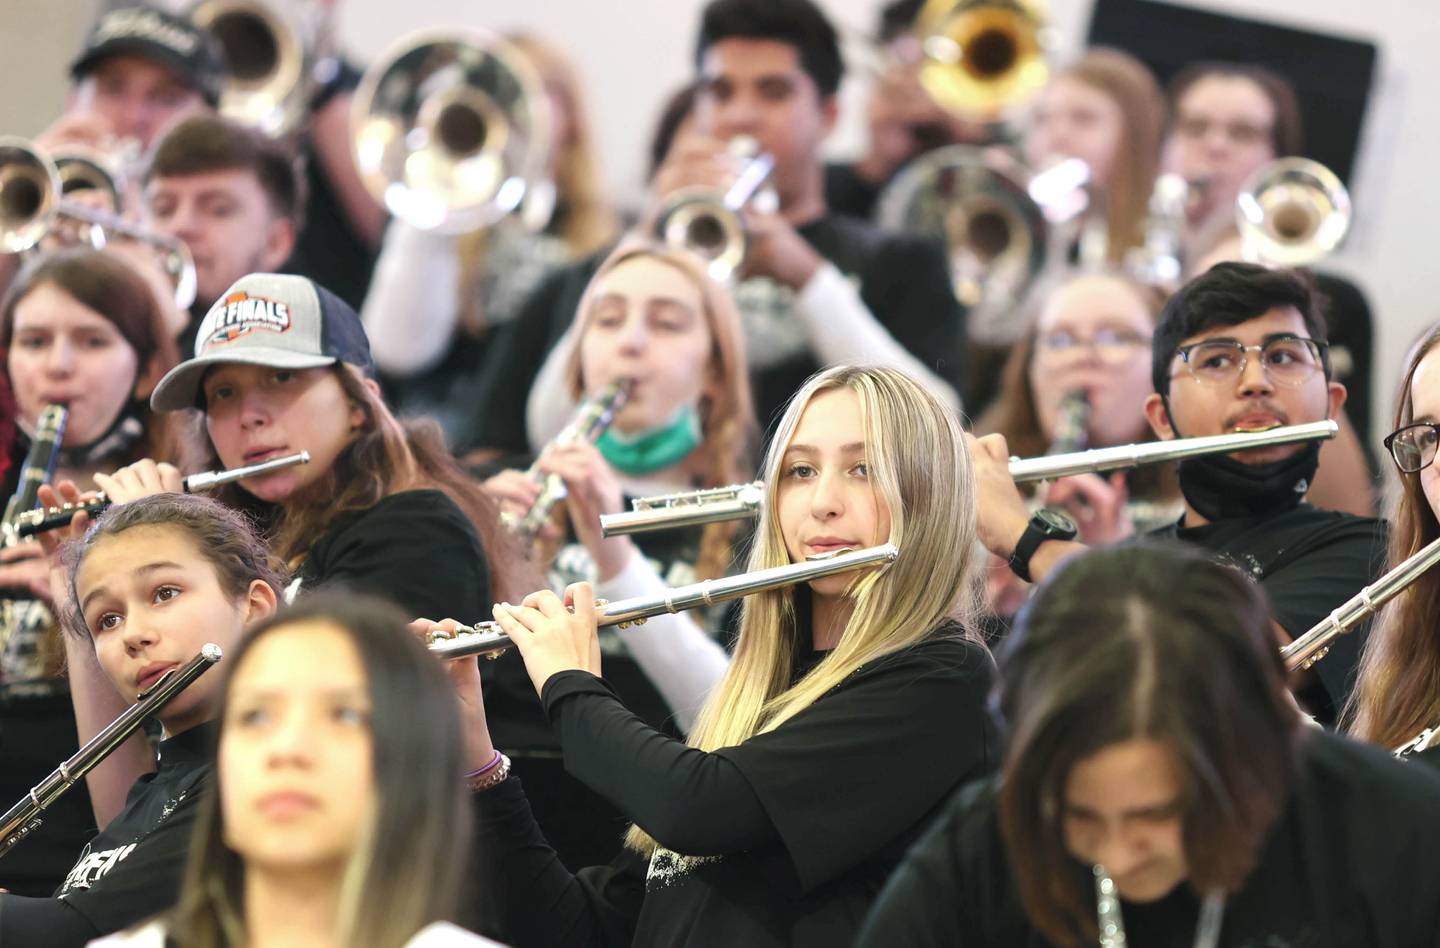 Band members Rock Falls entertain fans during a lull in the action during the IHSA Women's State Basketball Playoffs Friday, March 4, 2022 at Redbird Arena at State University from Illinois to Normal.